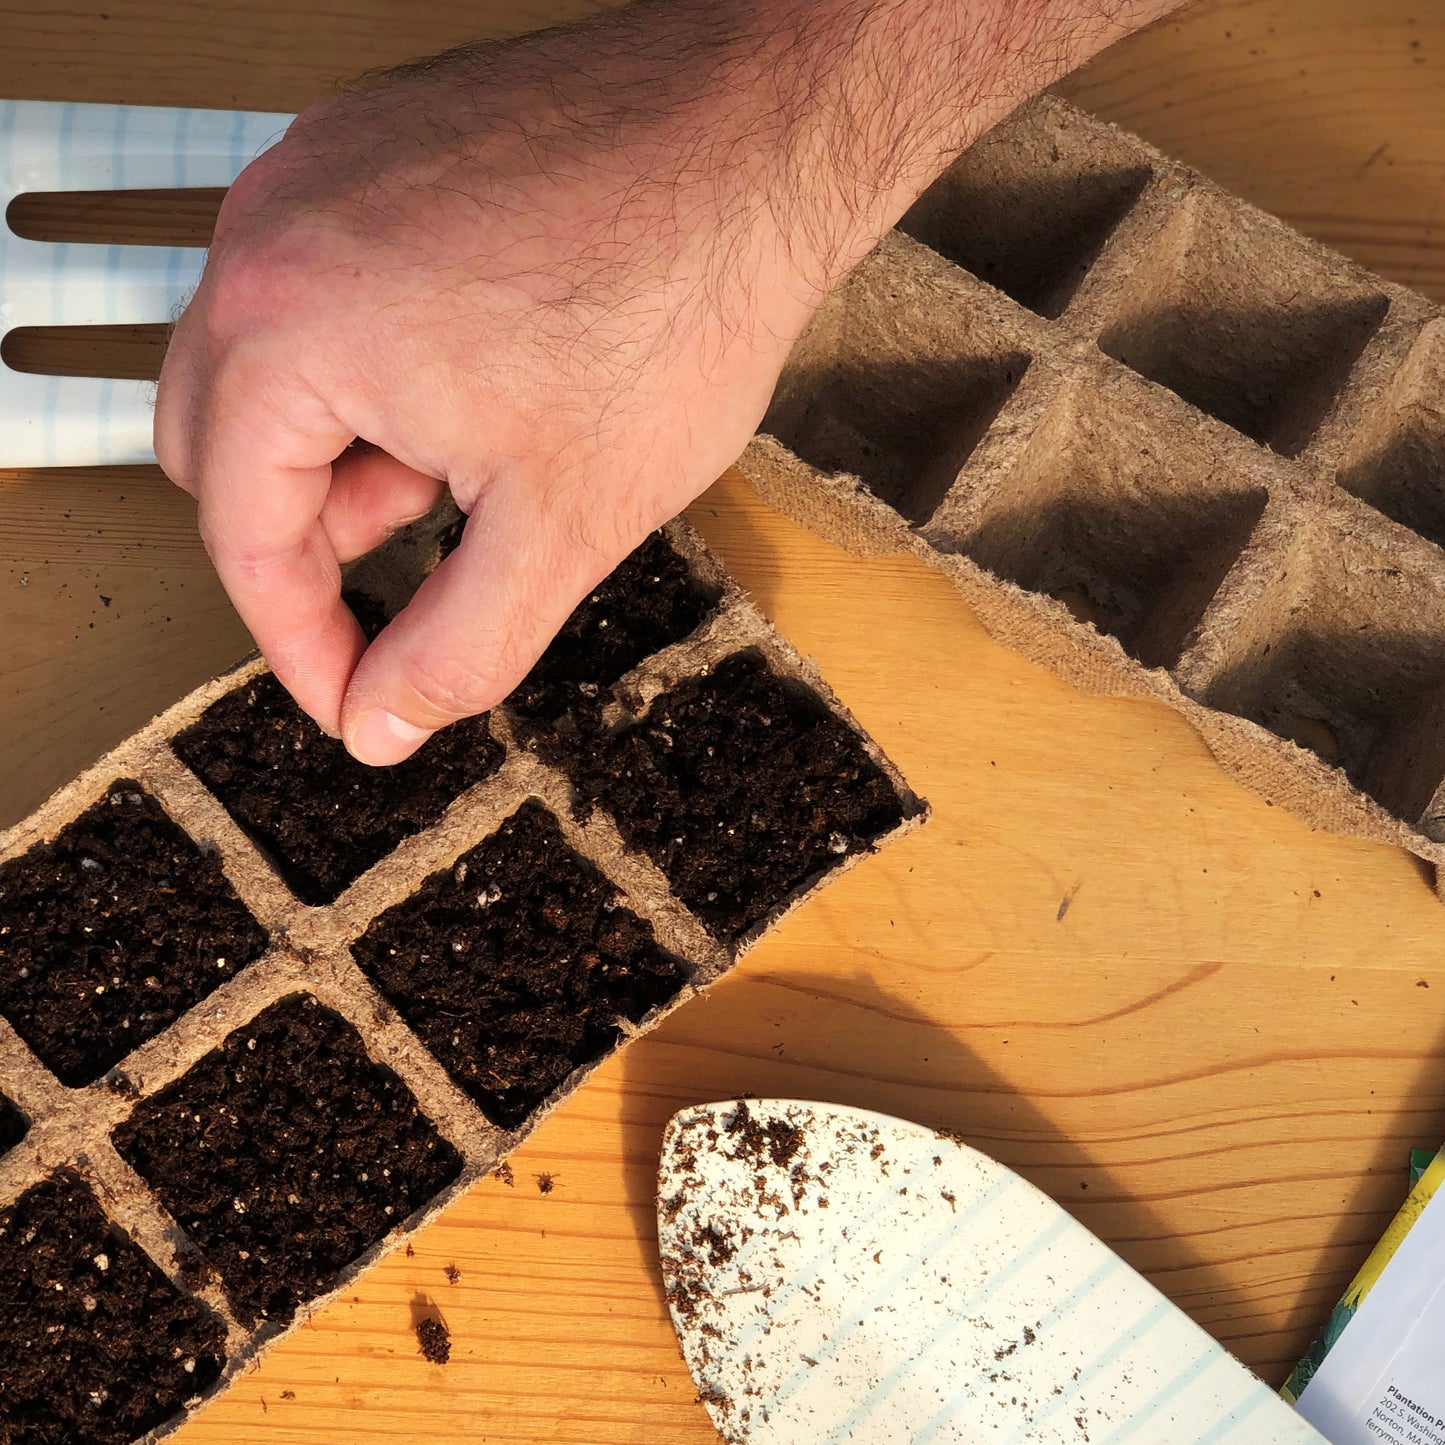 Start your mary washington asparagus seeds in biodegradable peat strips with sowing medium.